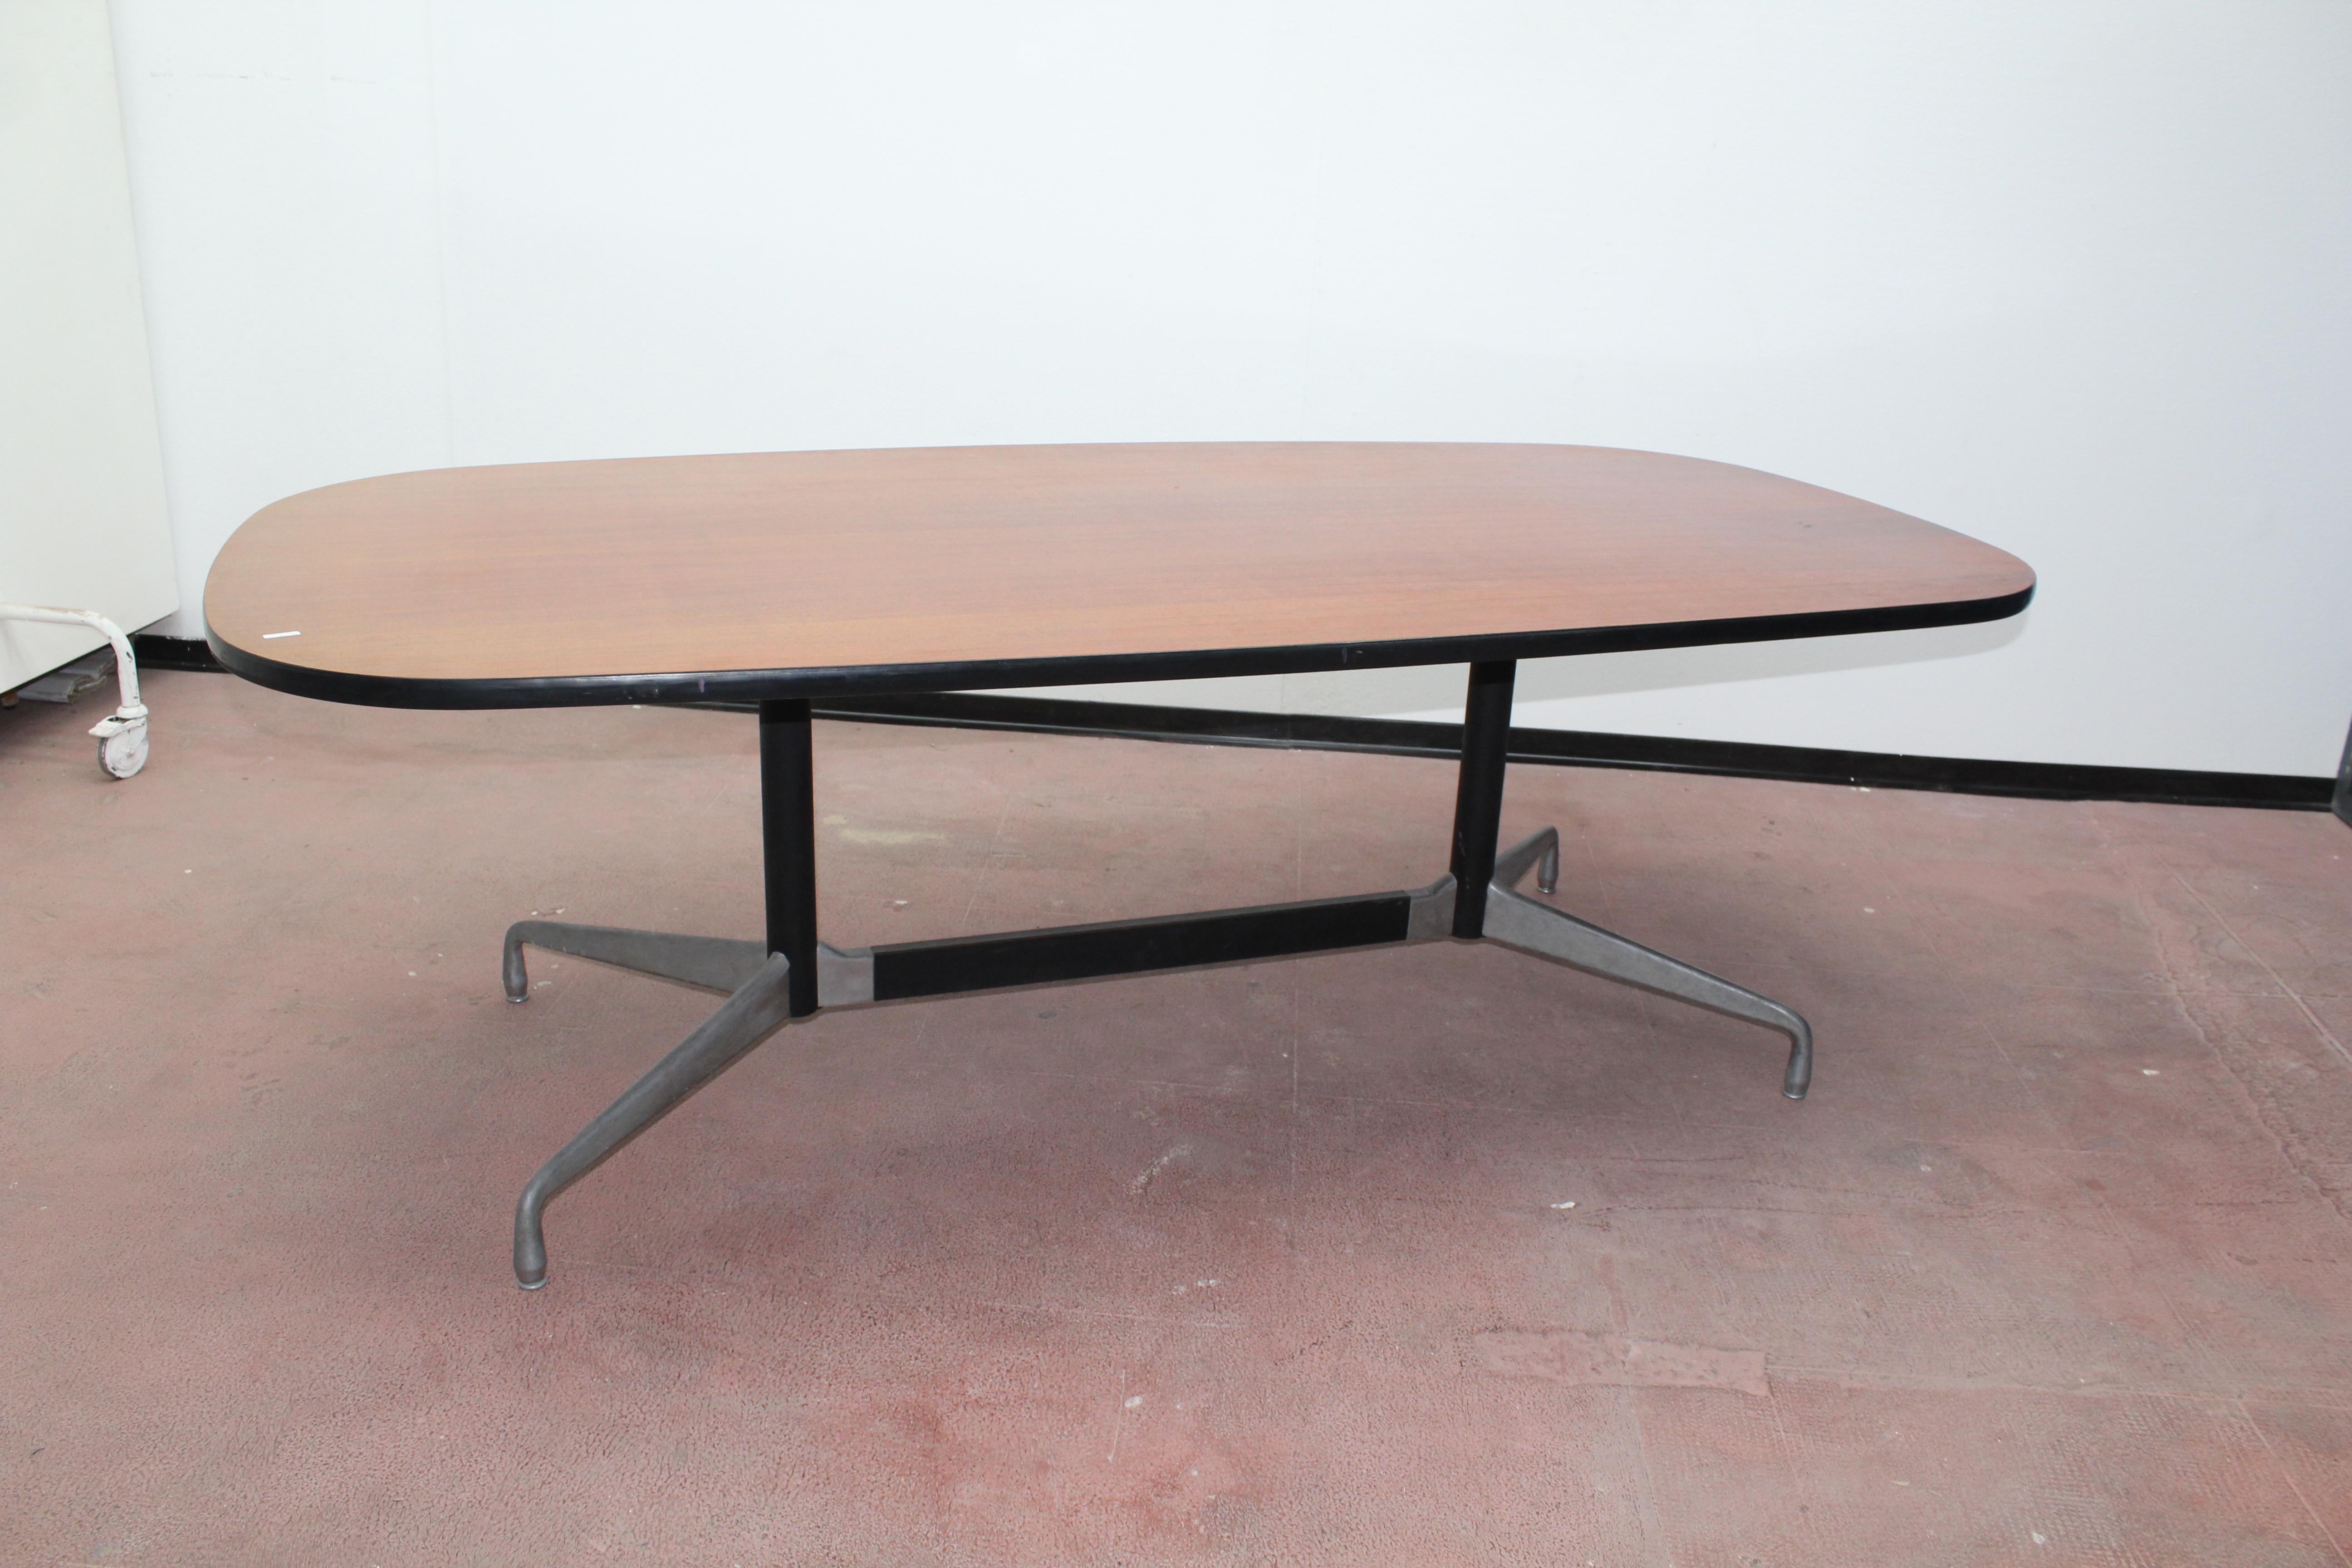 20th Century Modern Ashwood Conference Table Charles Eames 60s 3